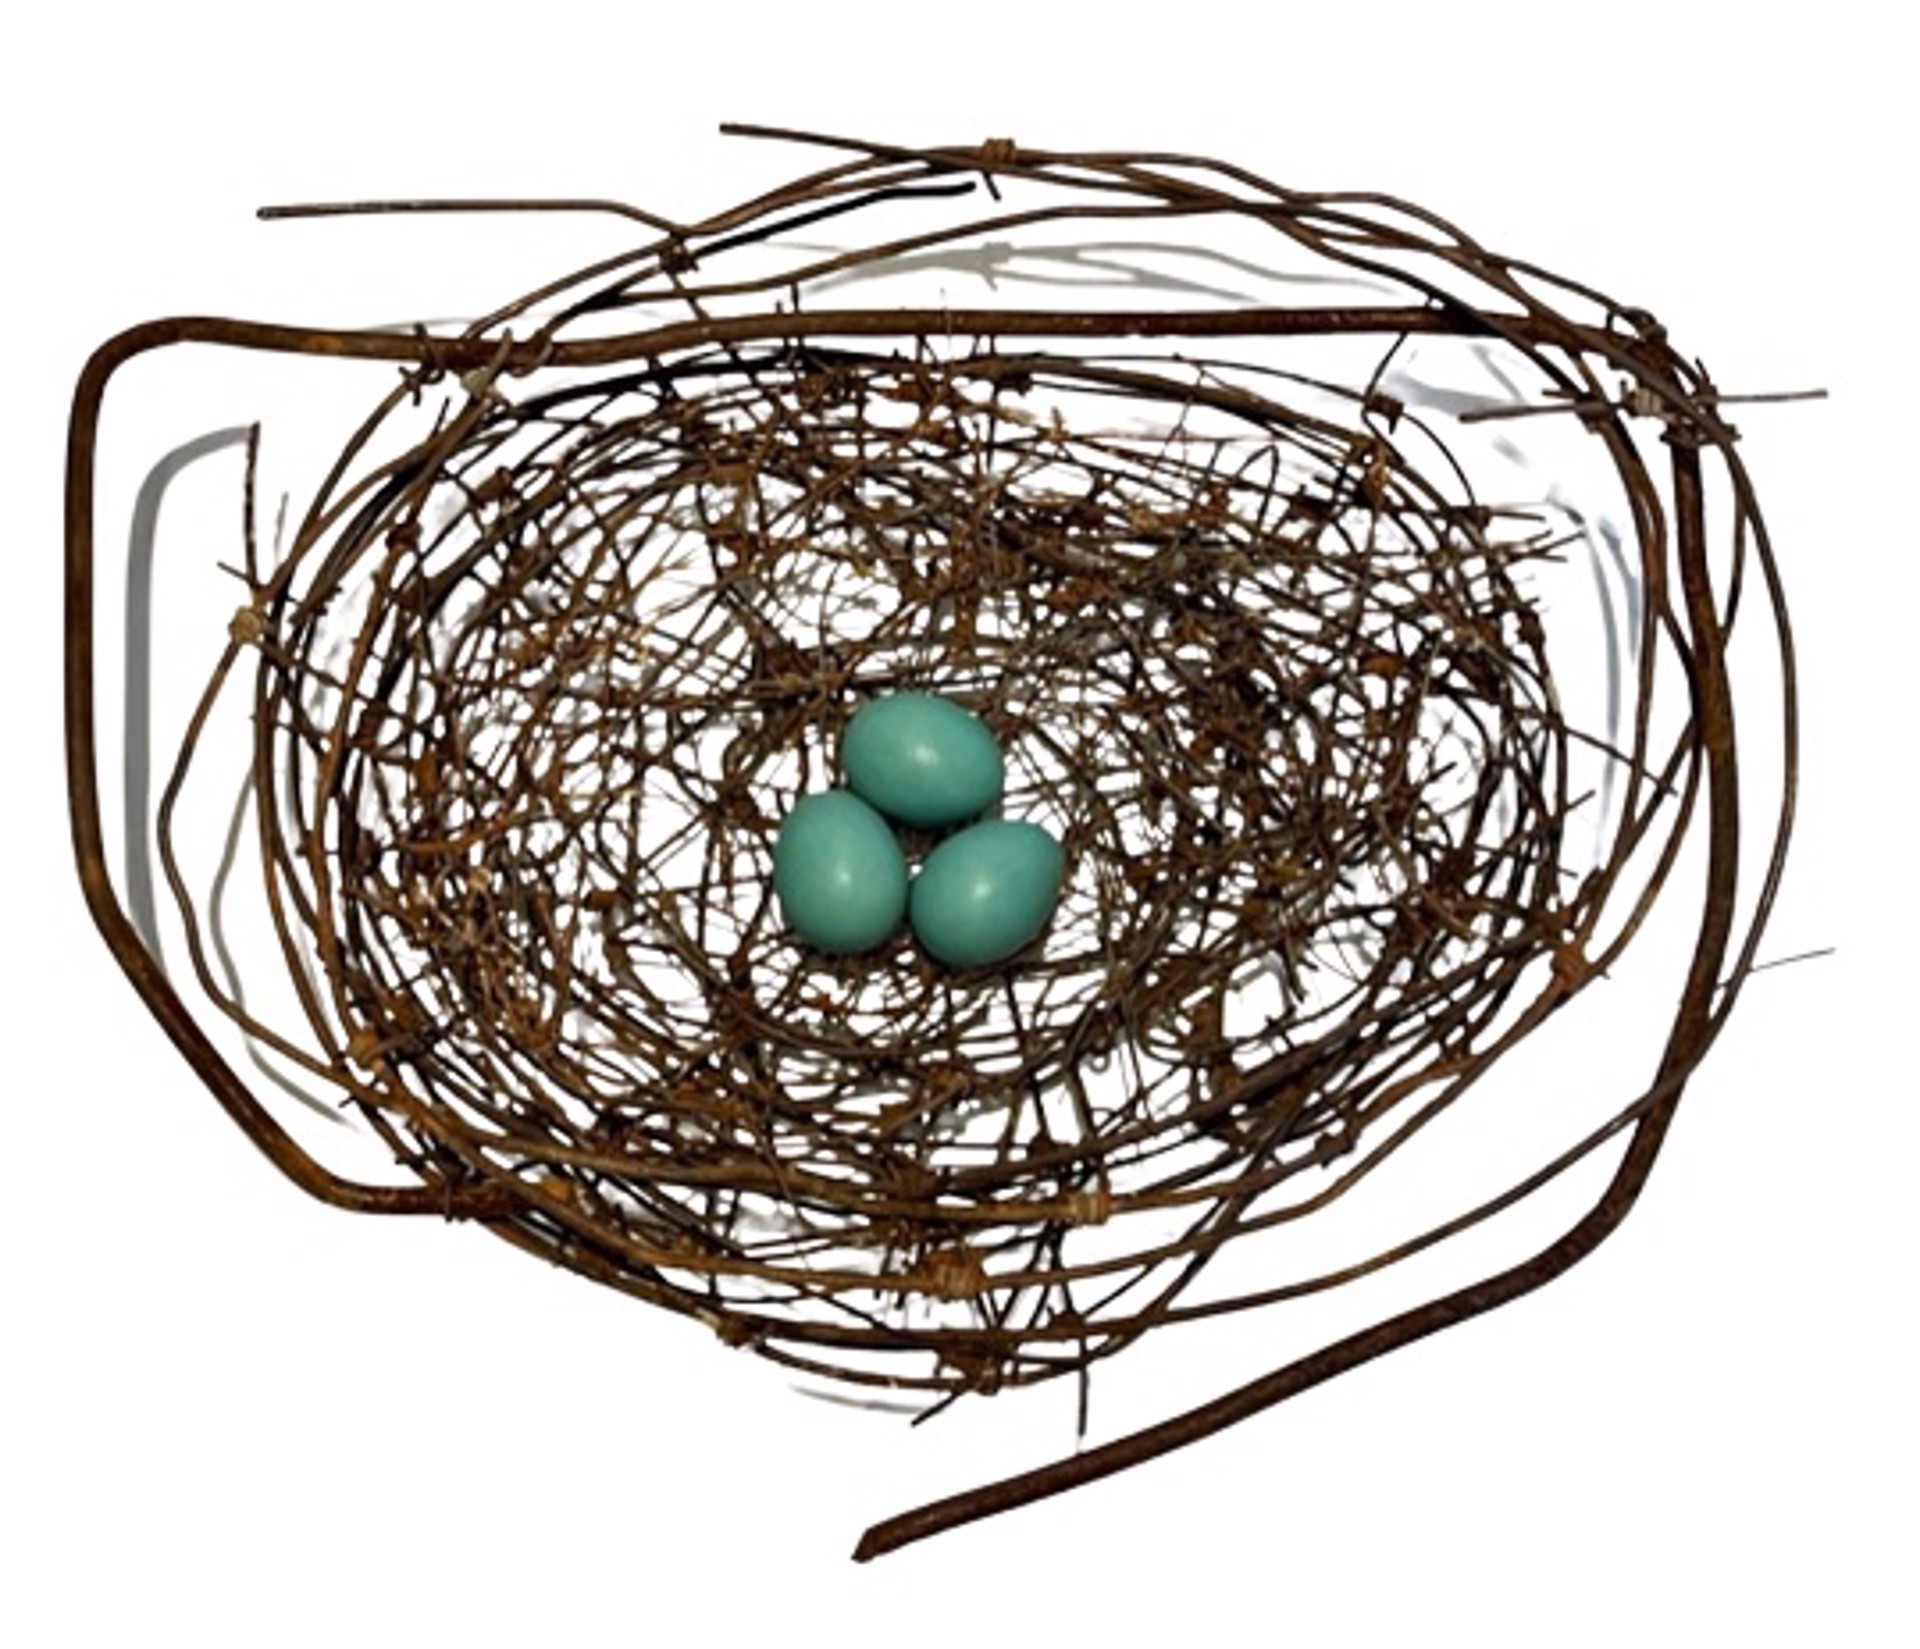 Hand Woven Wire Nest with 3 Small Turquoise Eggs #1287 by Phil Lichtenhan